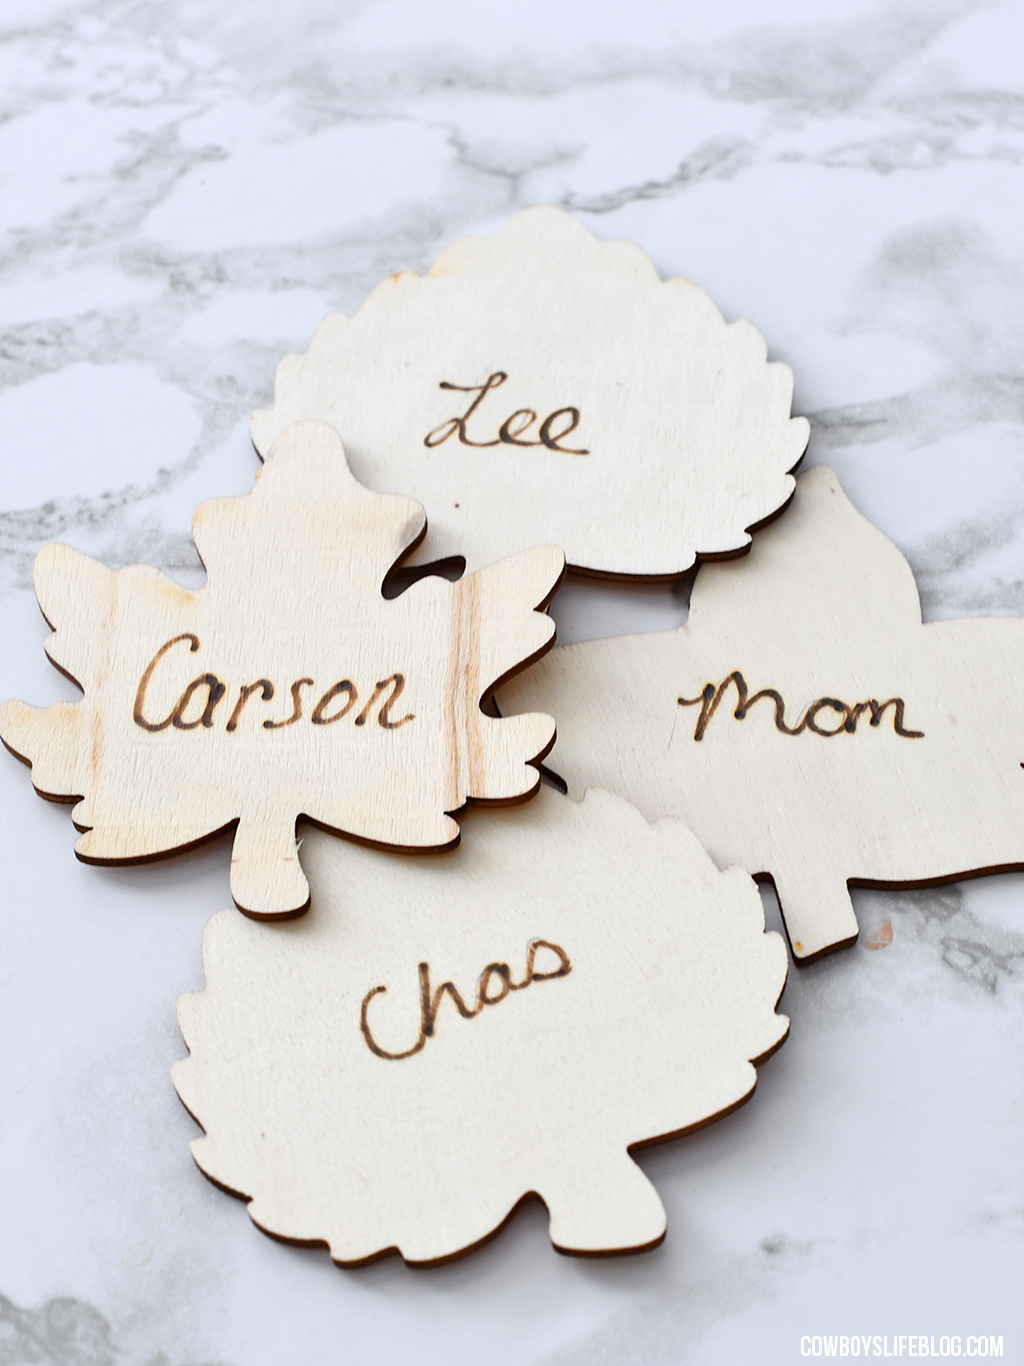 How to make DIY wood burned place cards